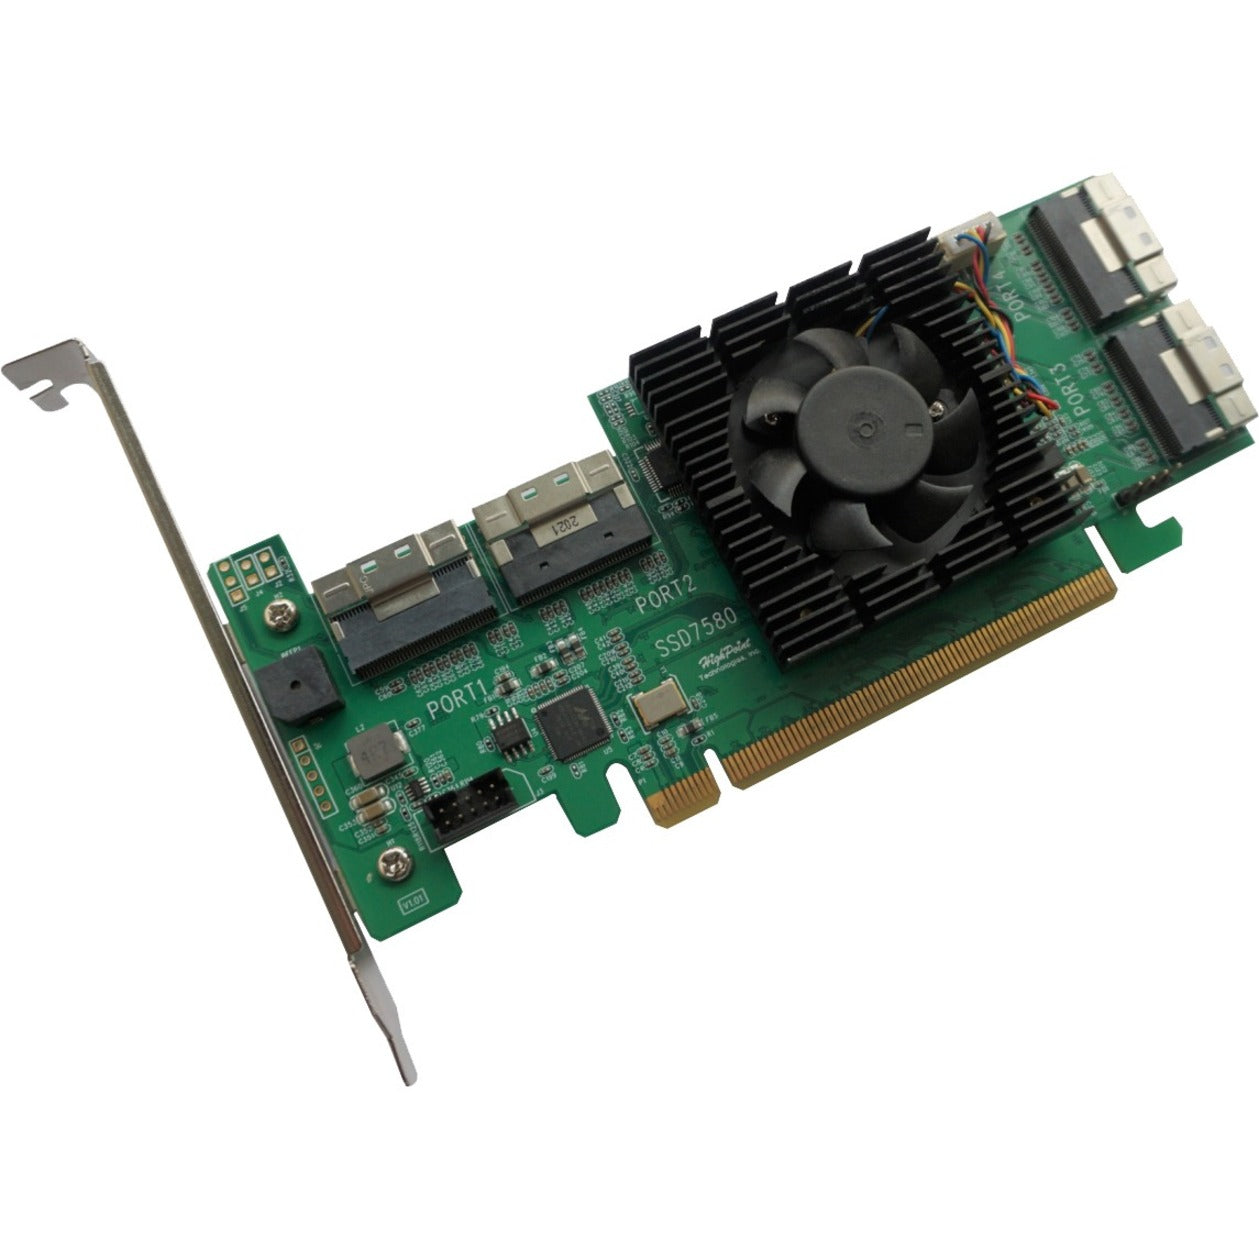 HighPoint SSD7580A NVMe Controller, PCIe 4.0 x16 RAID Controller for High-Speed Storage